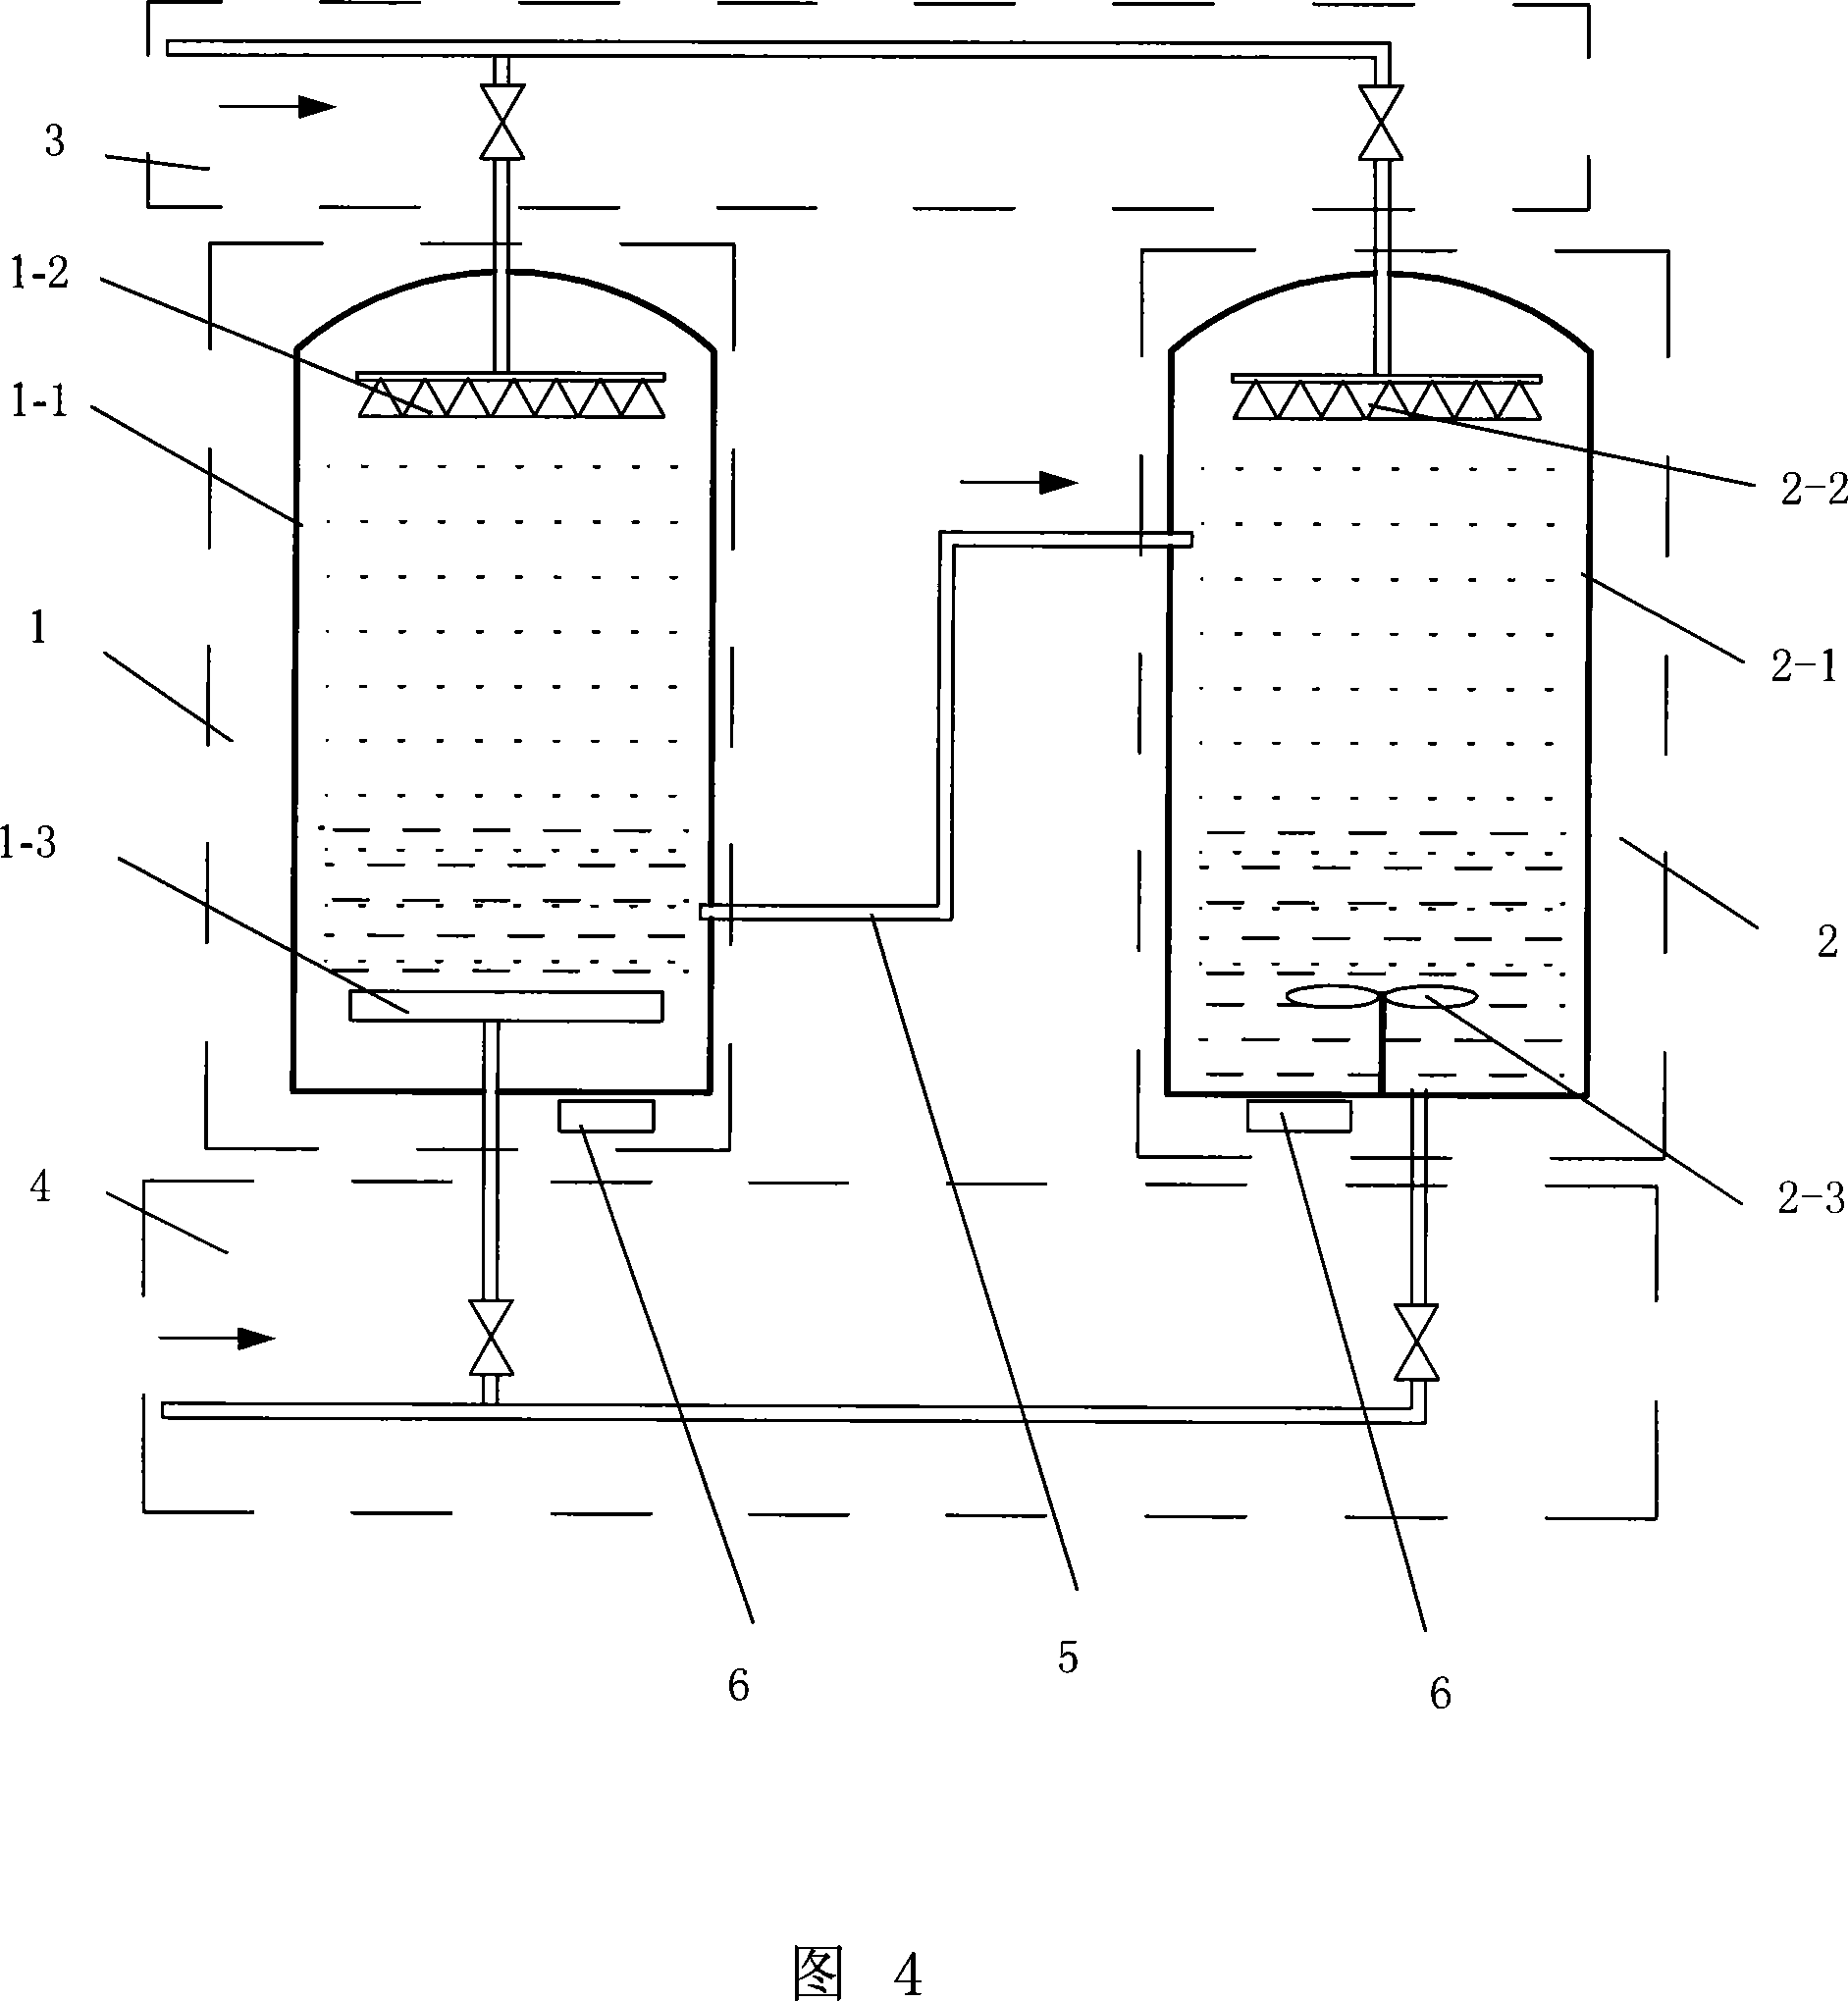 Two-stage series reactor for synthesis of natural gas hydrates